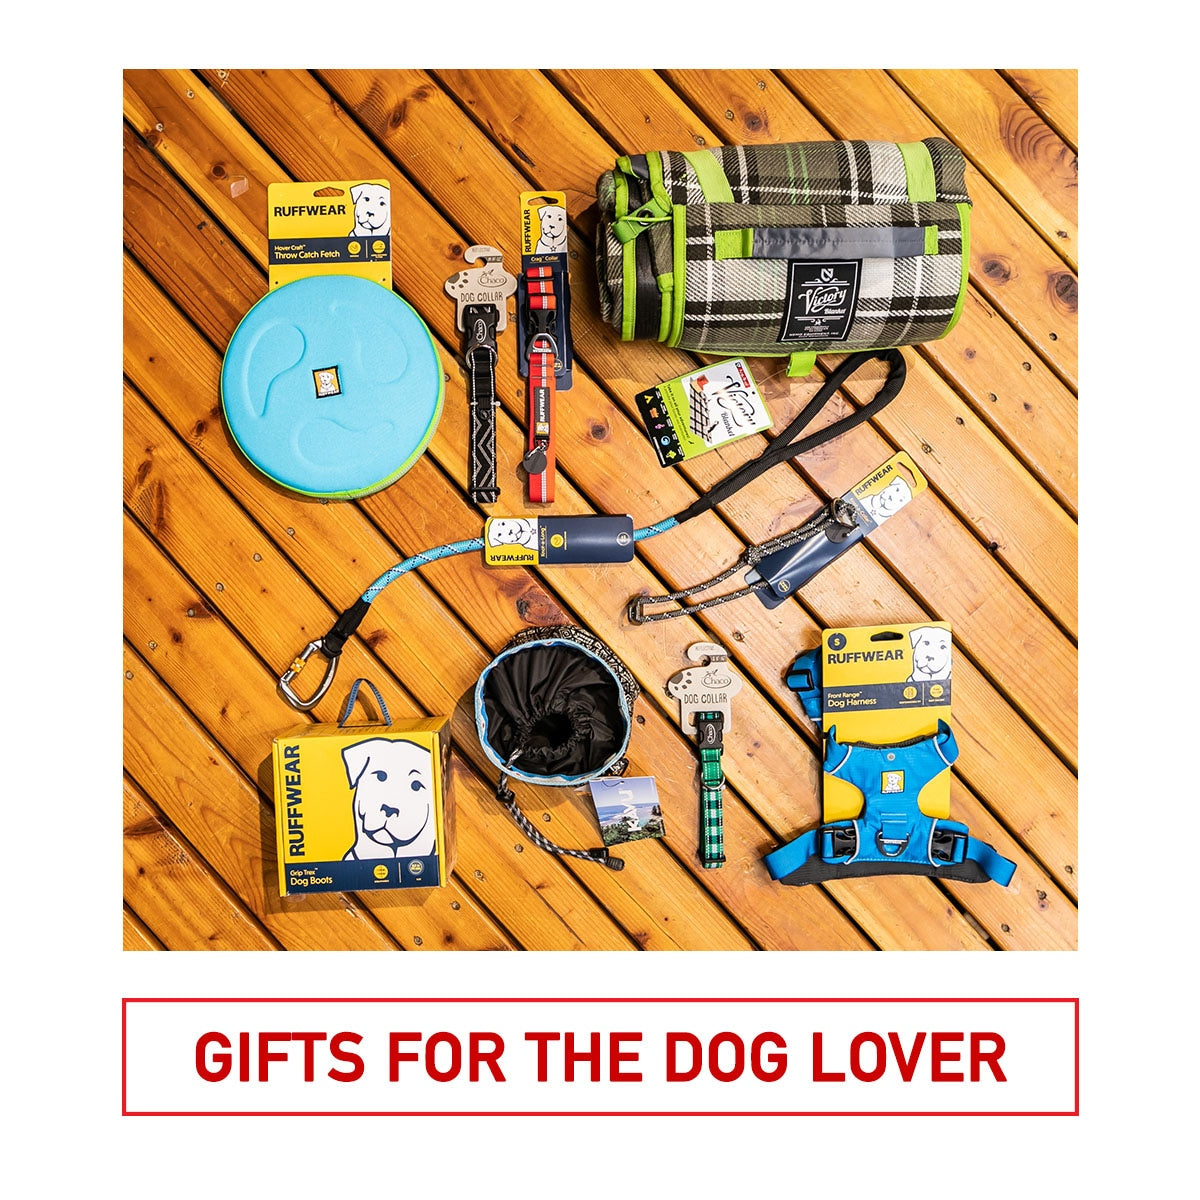 Gifts for the Dog Lover